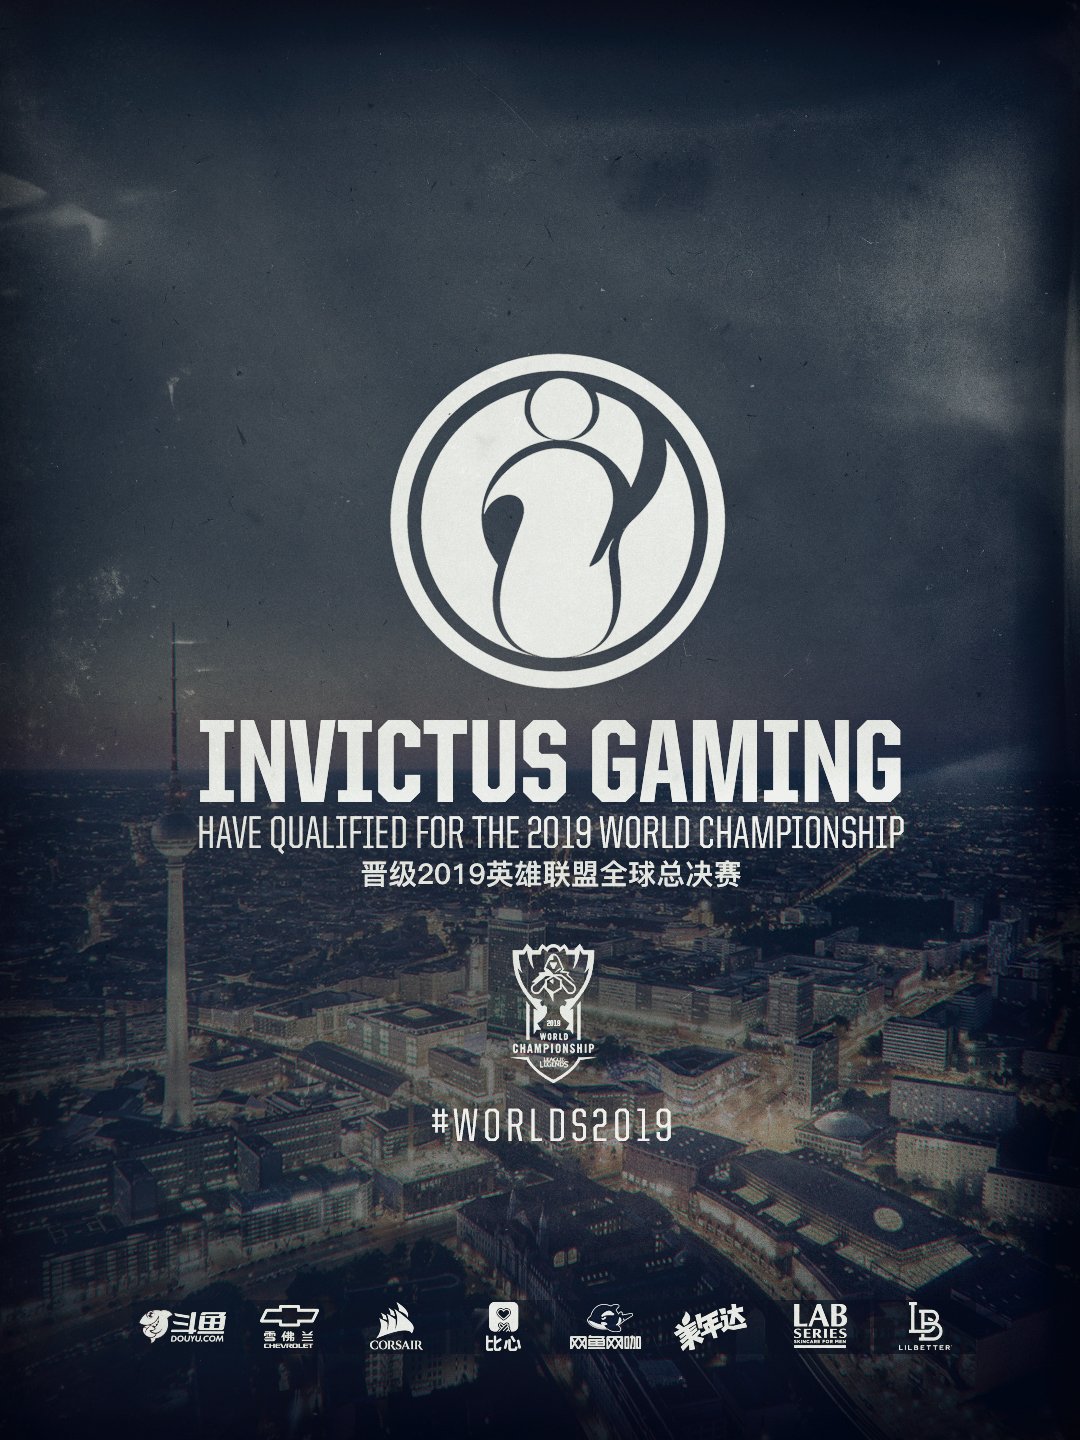 Free download Invictus Gaming on We made it Europe here we come [1080x1440]  for your Desktop, Mobile & Tablet | Explore 27+ Invictus Gaming Wallpapers  | Astro Gaming Wallpaper, Gaming Wallpapers, Razer Gaming Wallpaper